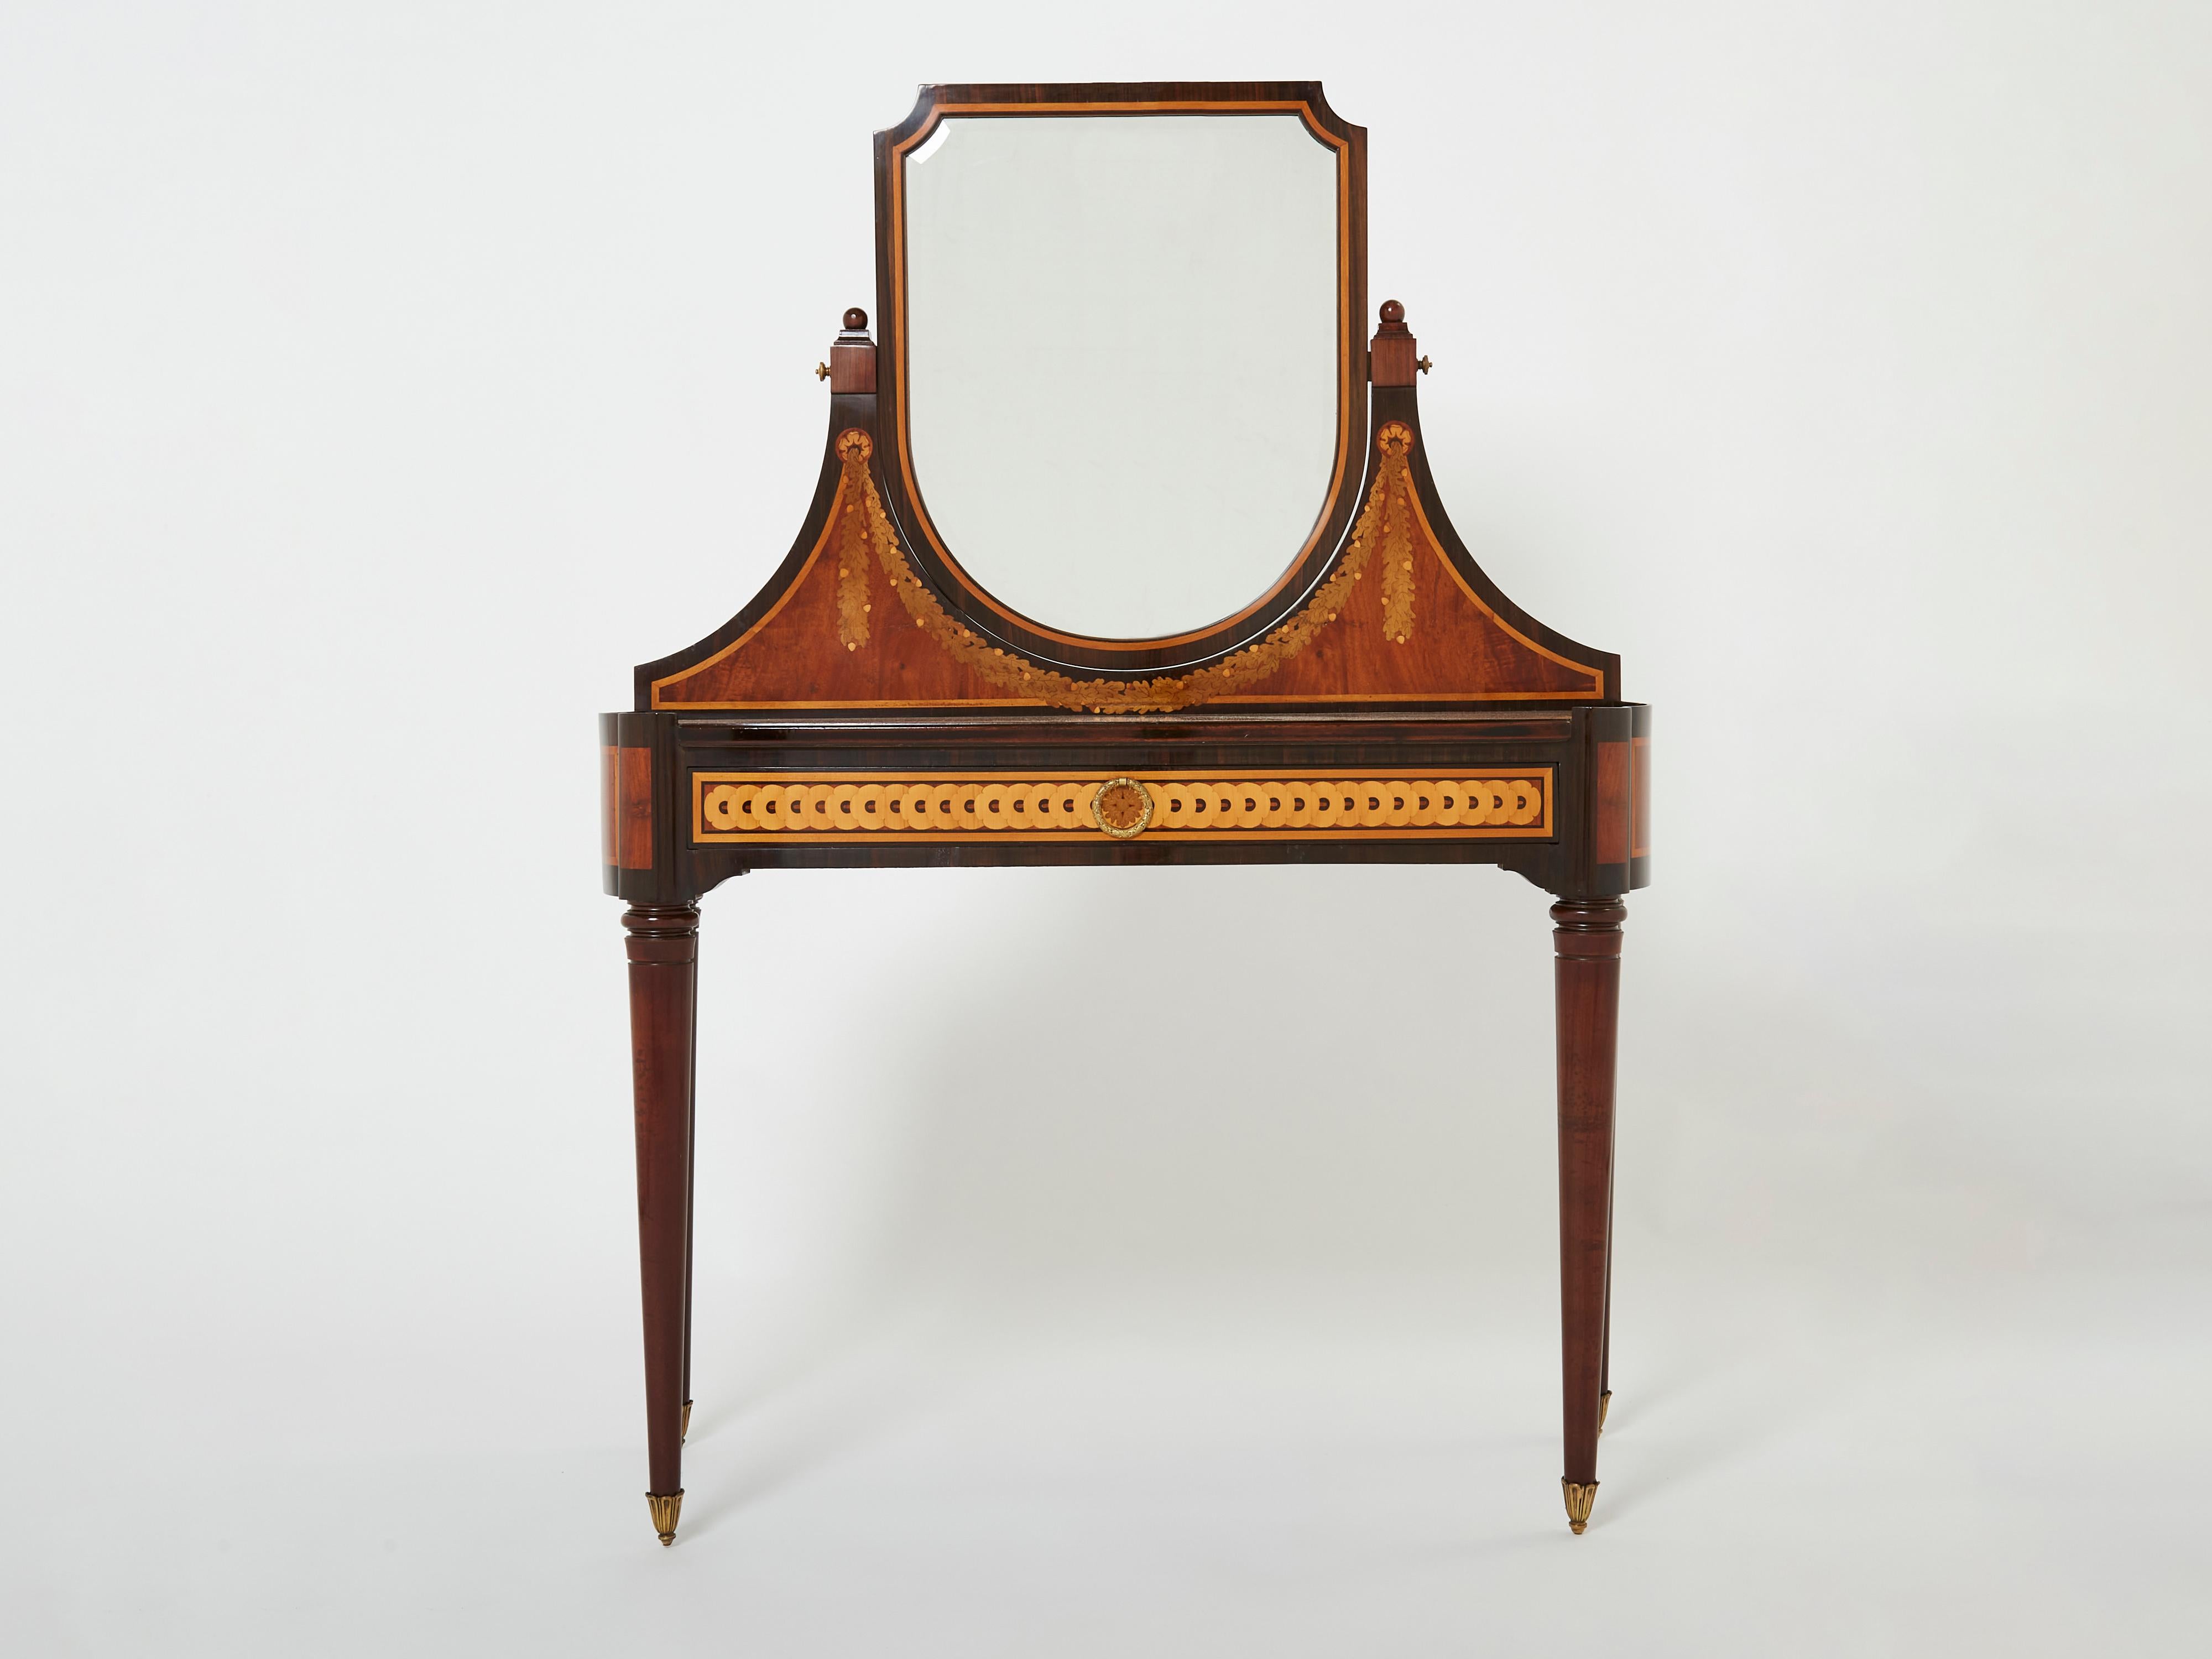 This French early Art Deco vanity is attributed to Maurice Dufrene for La Maitrise, Les Galeries Lafayette arts décoratifs ateliers in Paris launched in 1922. This dressing table is completely veneered in various woods including amaranth, rosewood